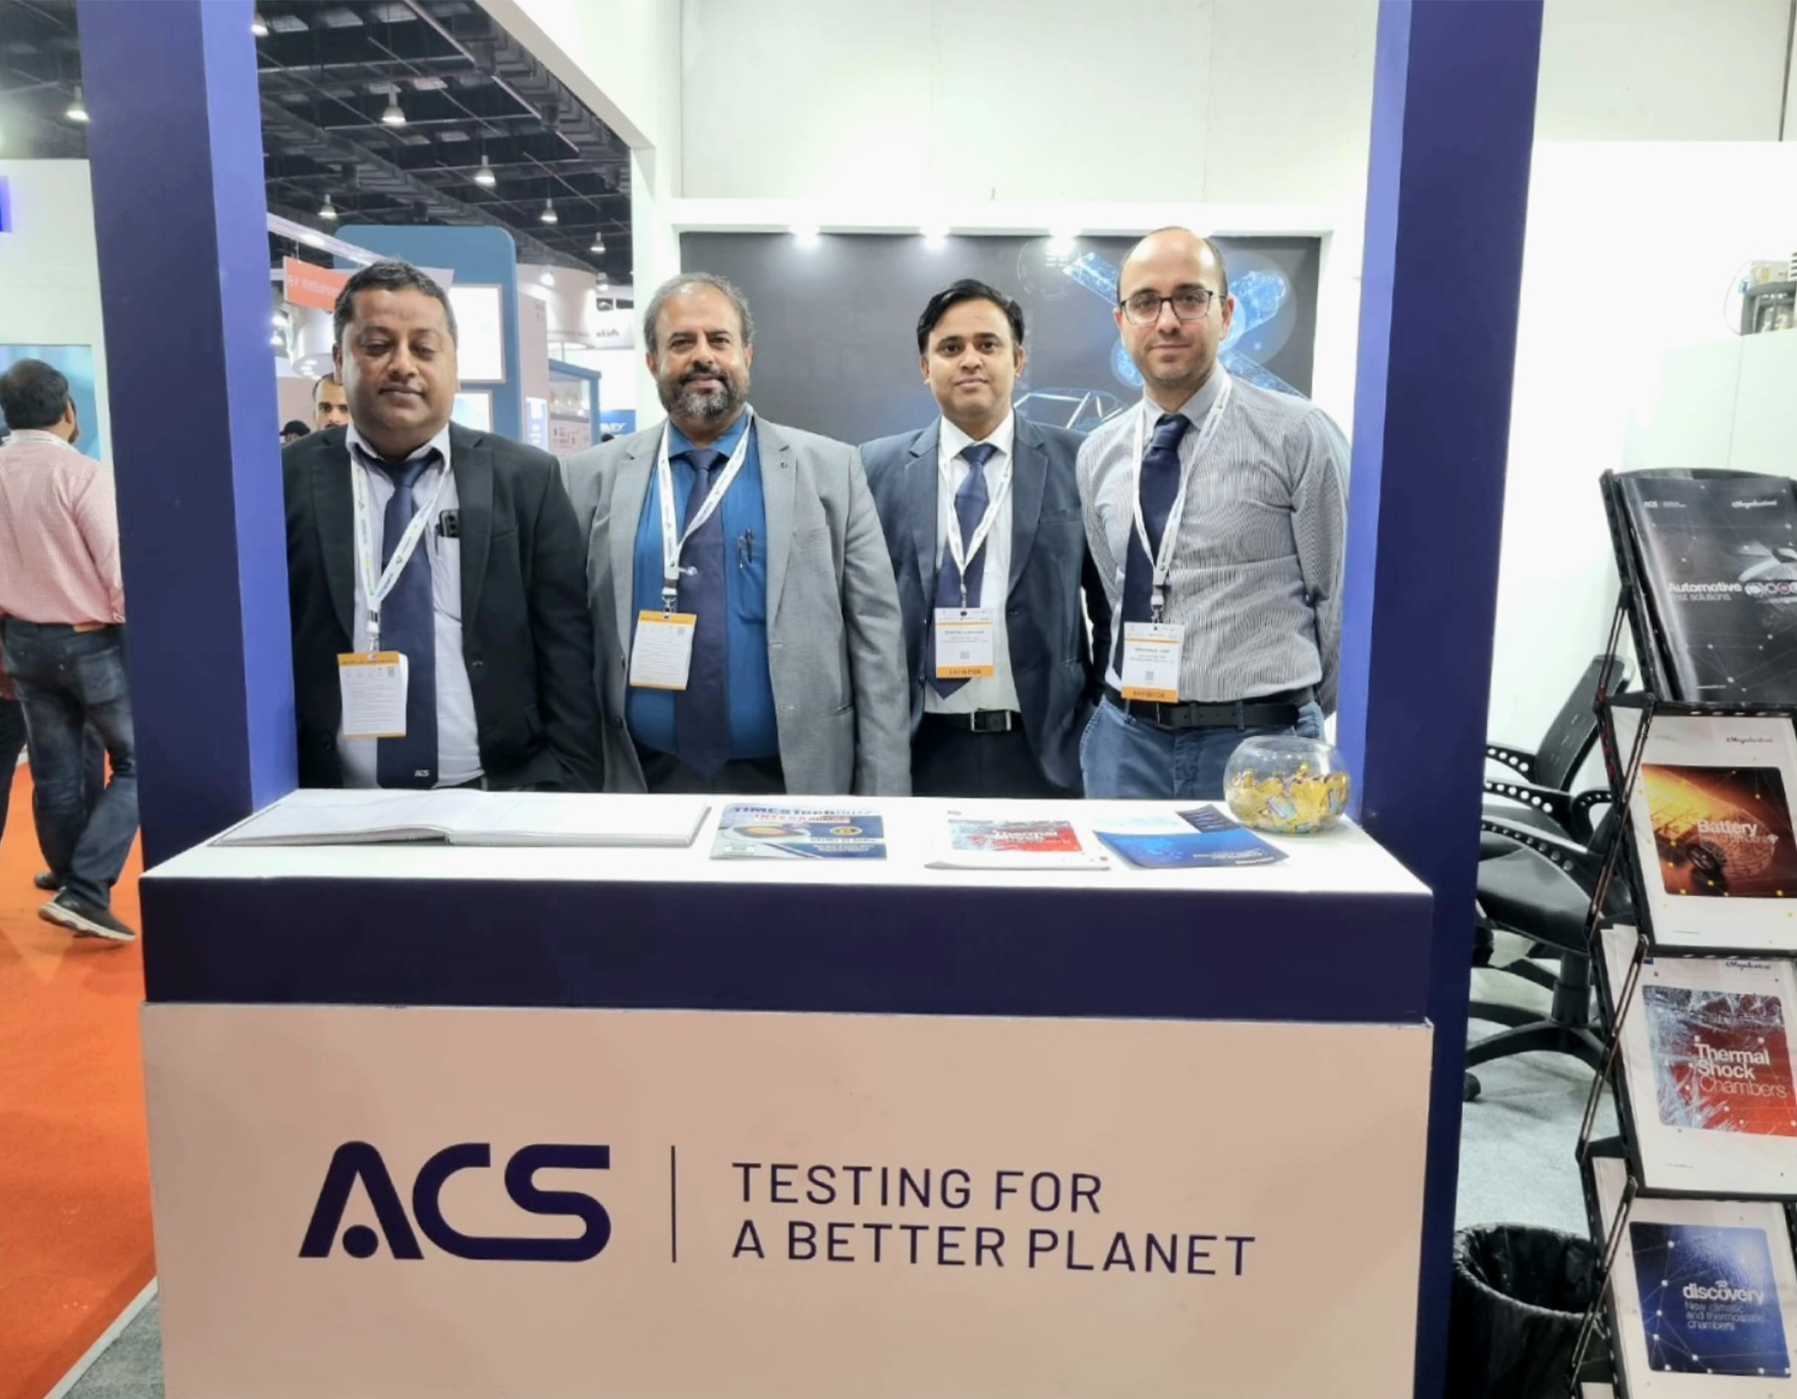 The ACS team at Productronica India 2022